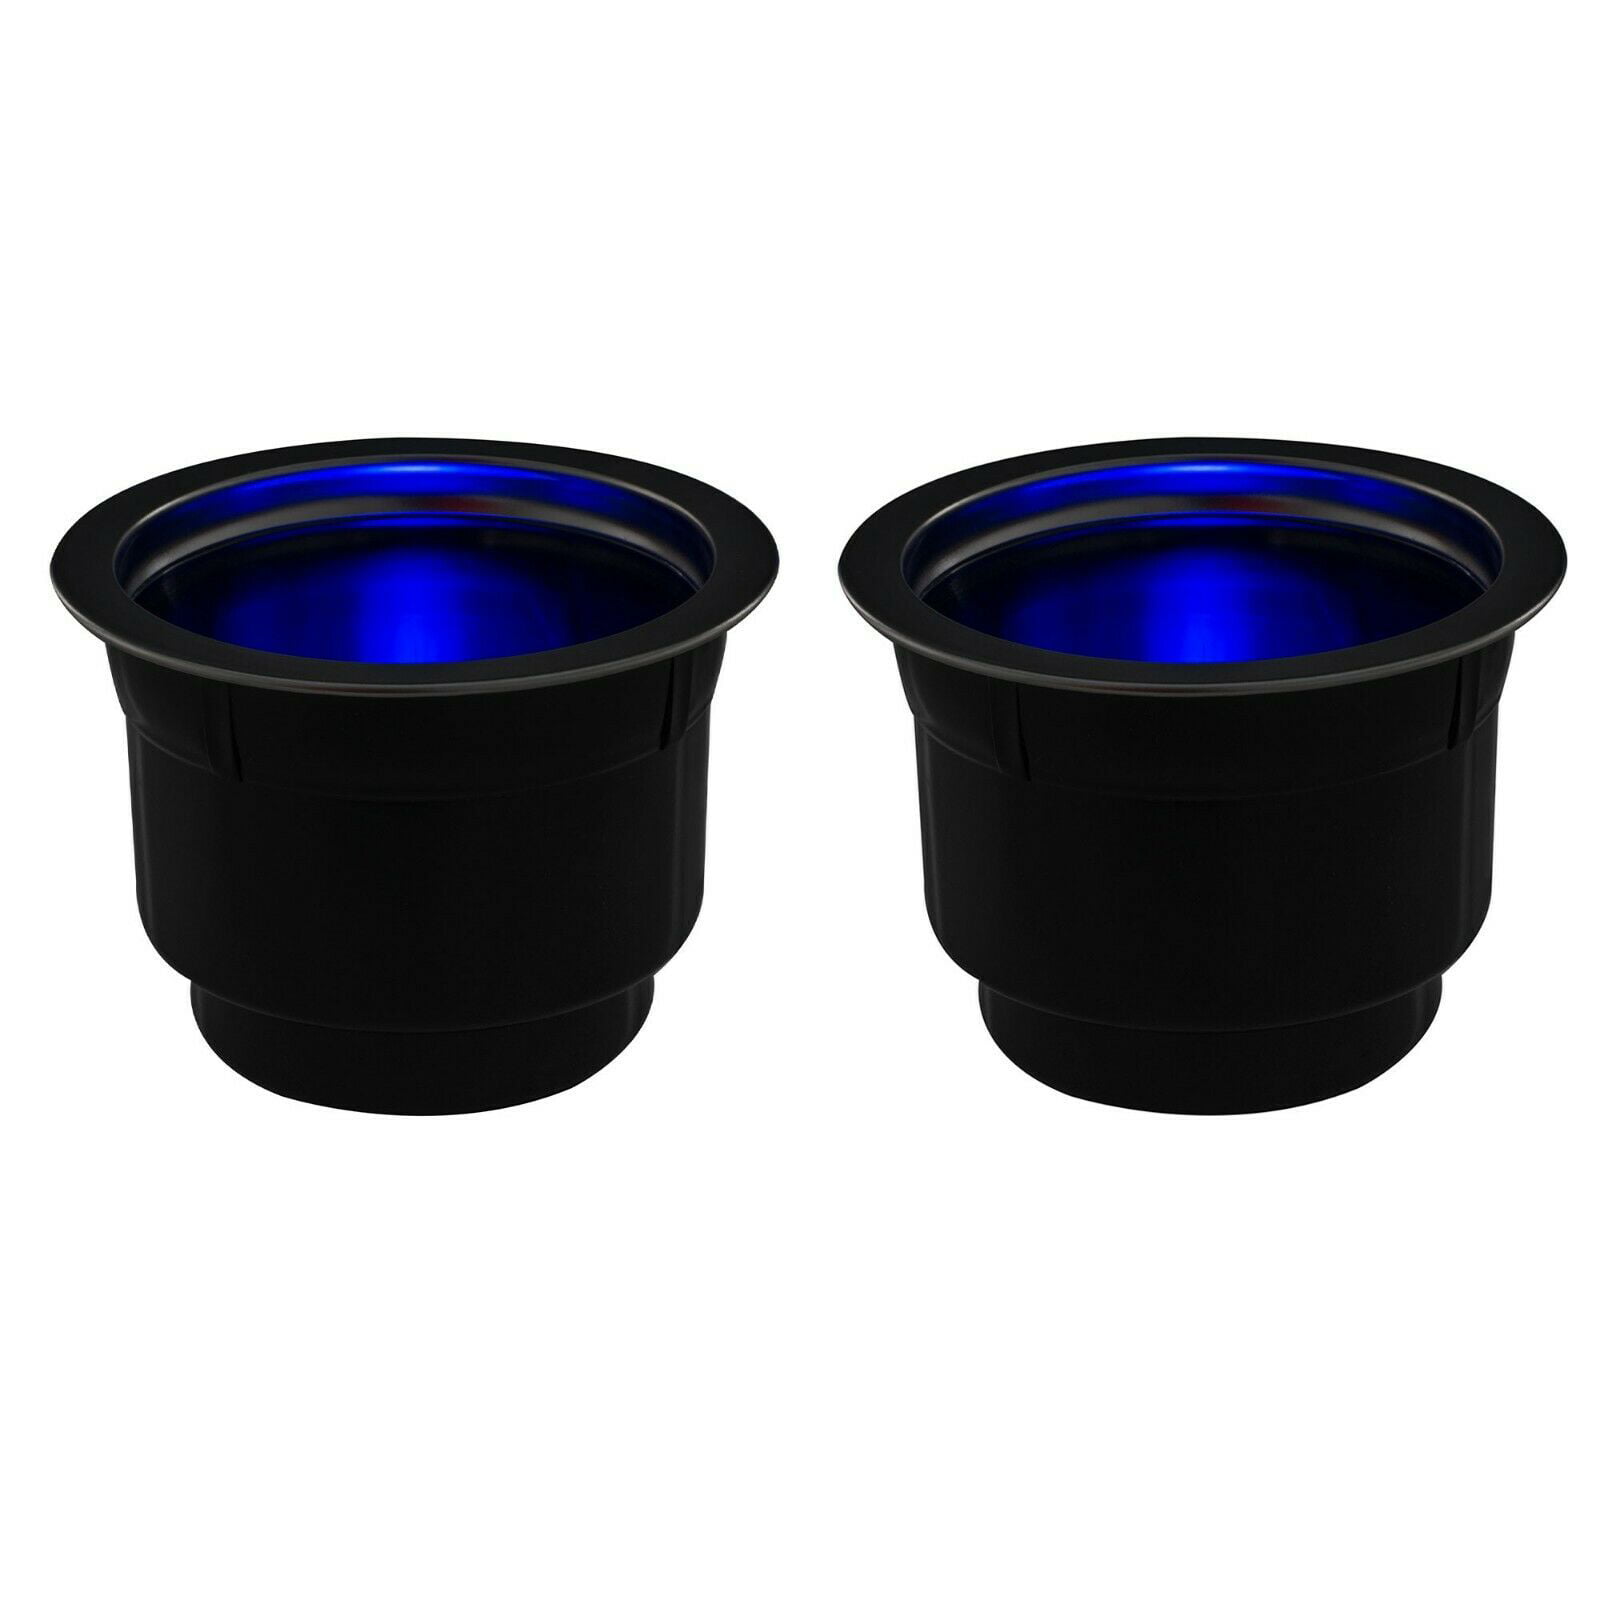 AWESOME Stainless Steel Drink Holder Blue LED Illuminated Ring Boat RV Van